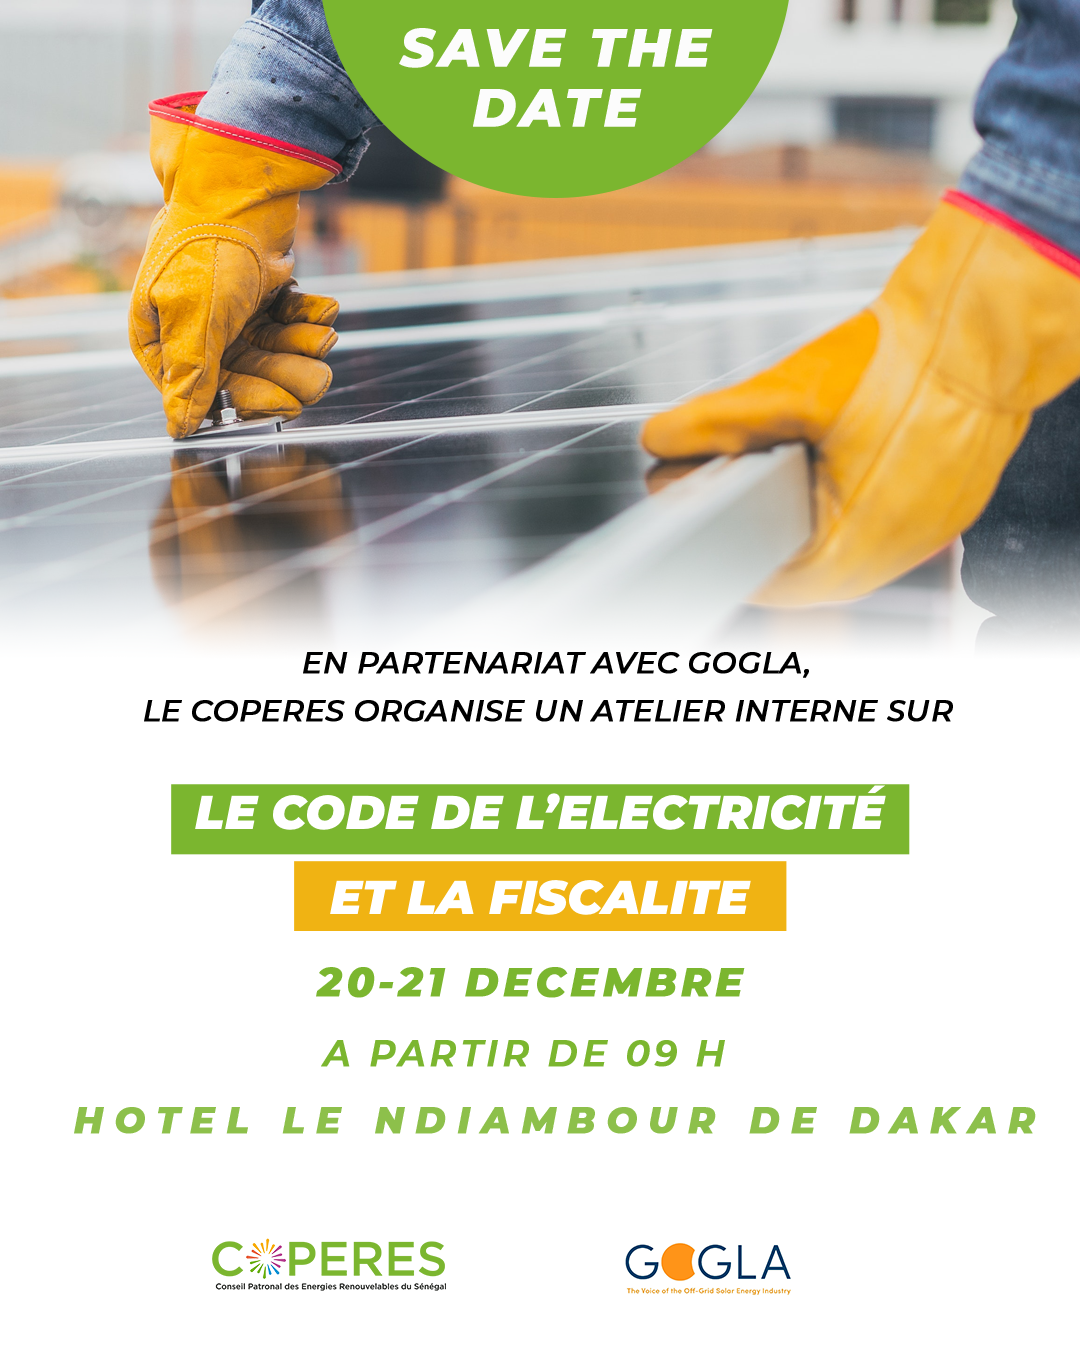 Information and awareness-raising workshop on the Electricity Code